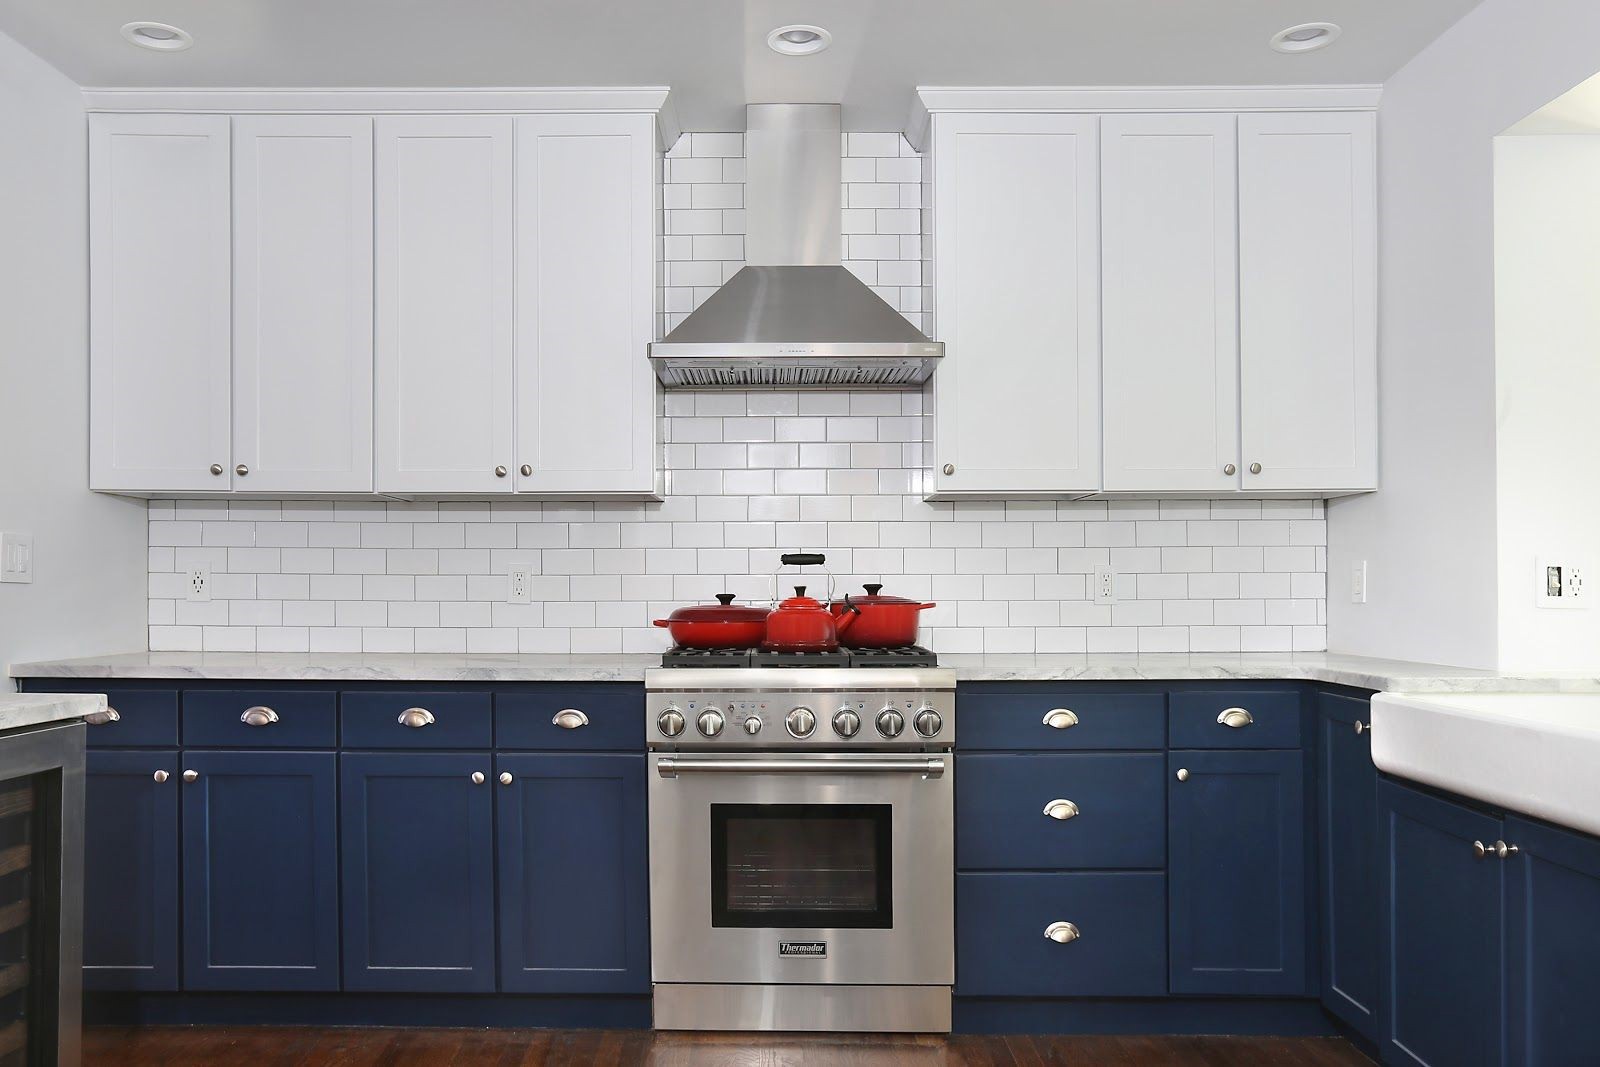 Beautiful two-tone cabinets? Yes please!